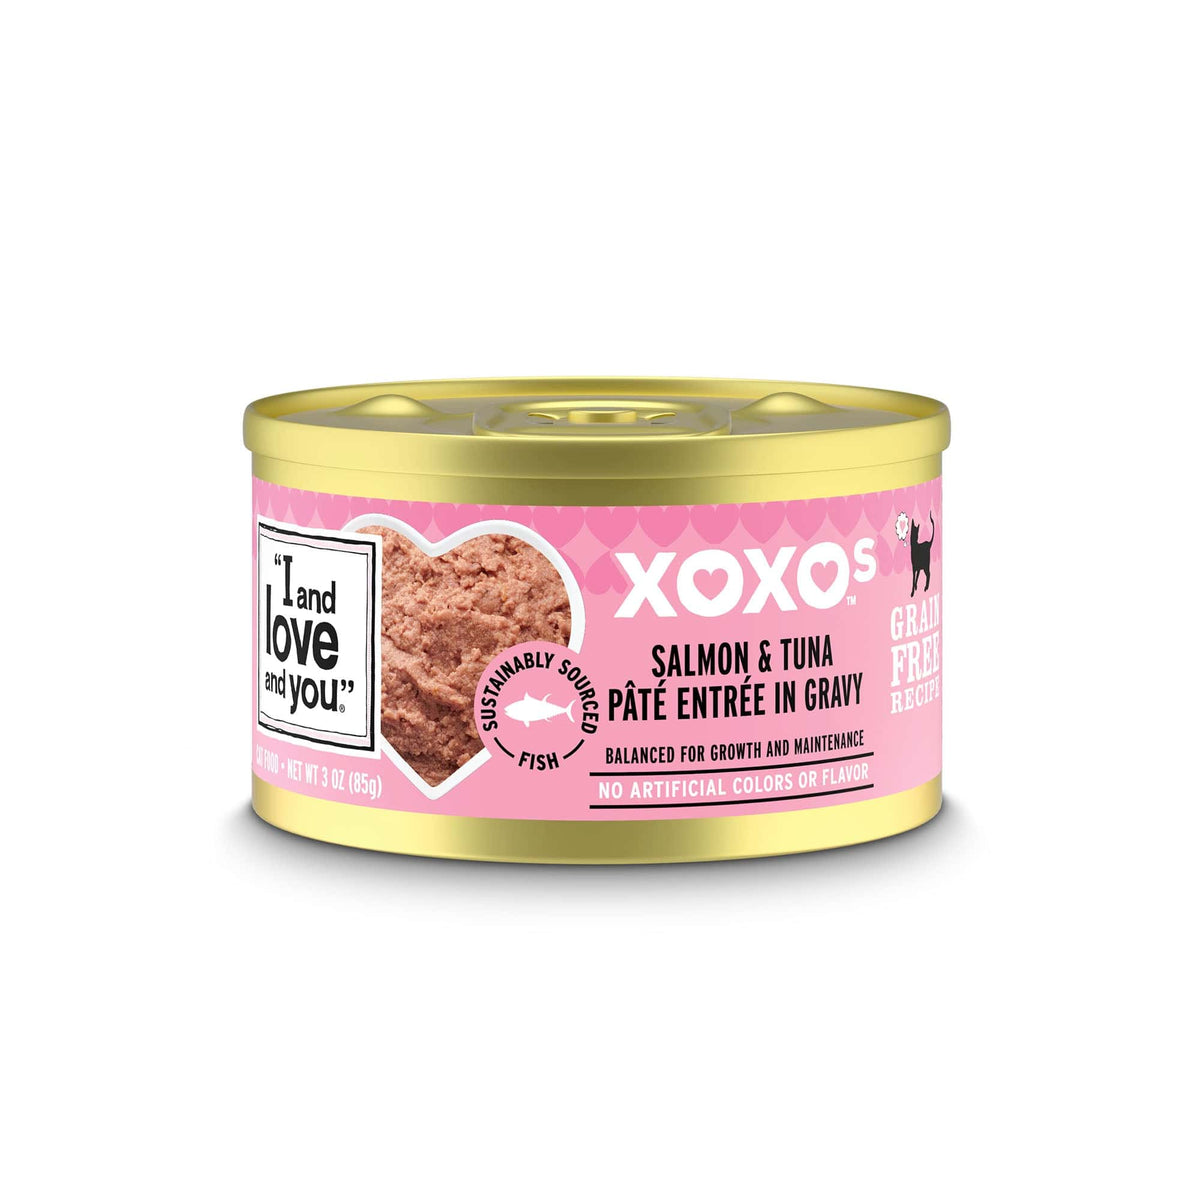 A can of XOXOs Salmon & Tuna Pate with labels and close-up details.